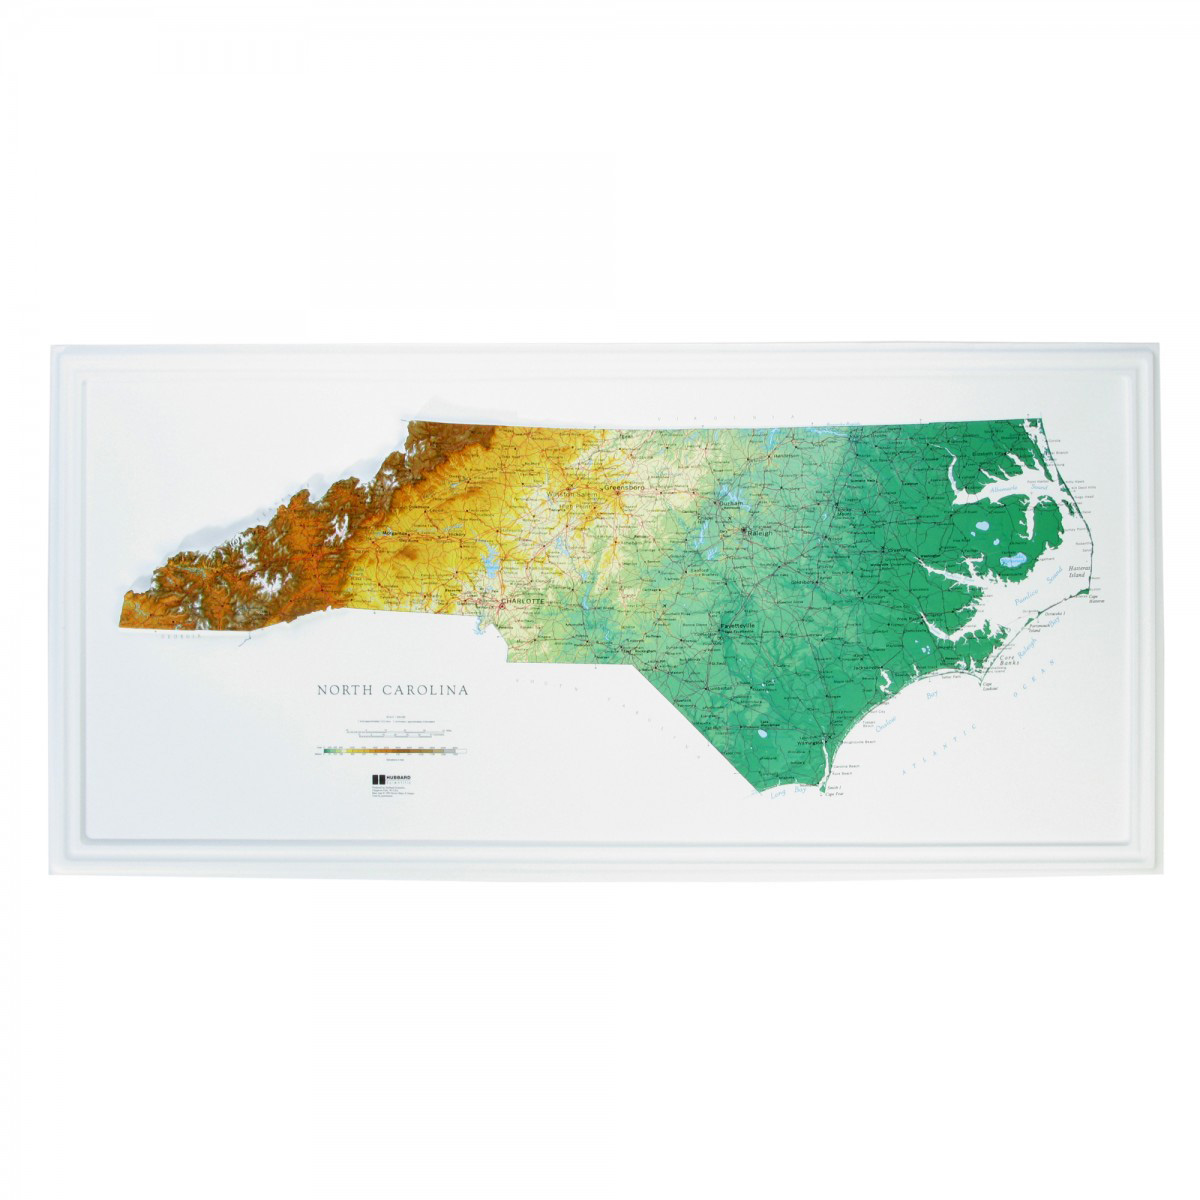 Picture of TestPlay 3077 39.5 x 18.5 in. North Carolina State Raised Relief Map, Framed - Large